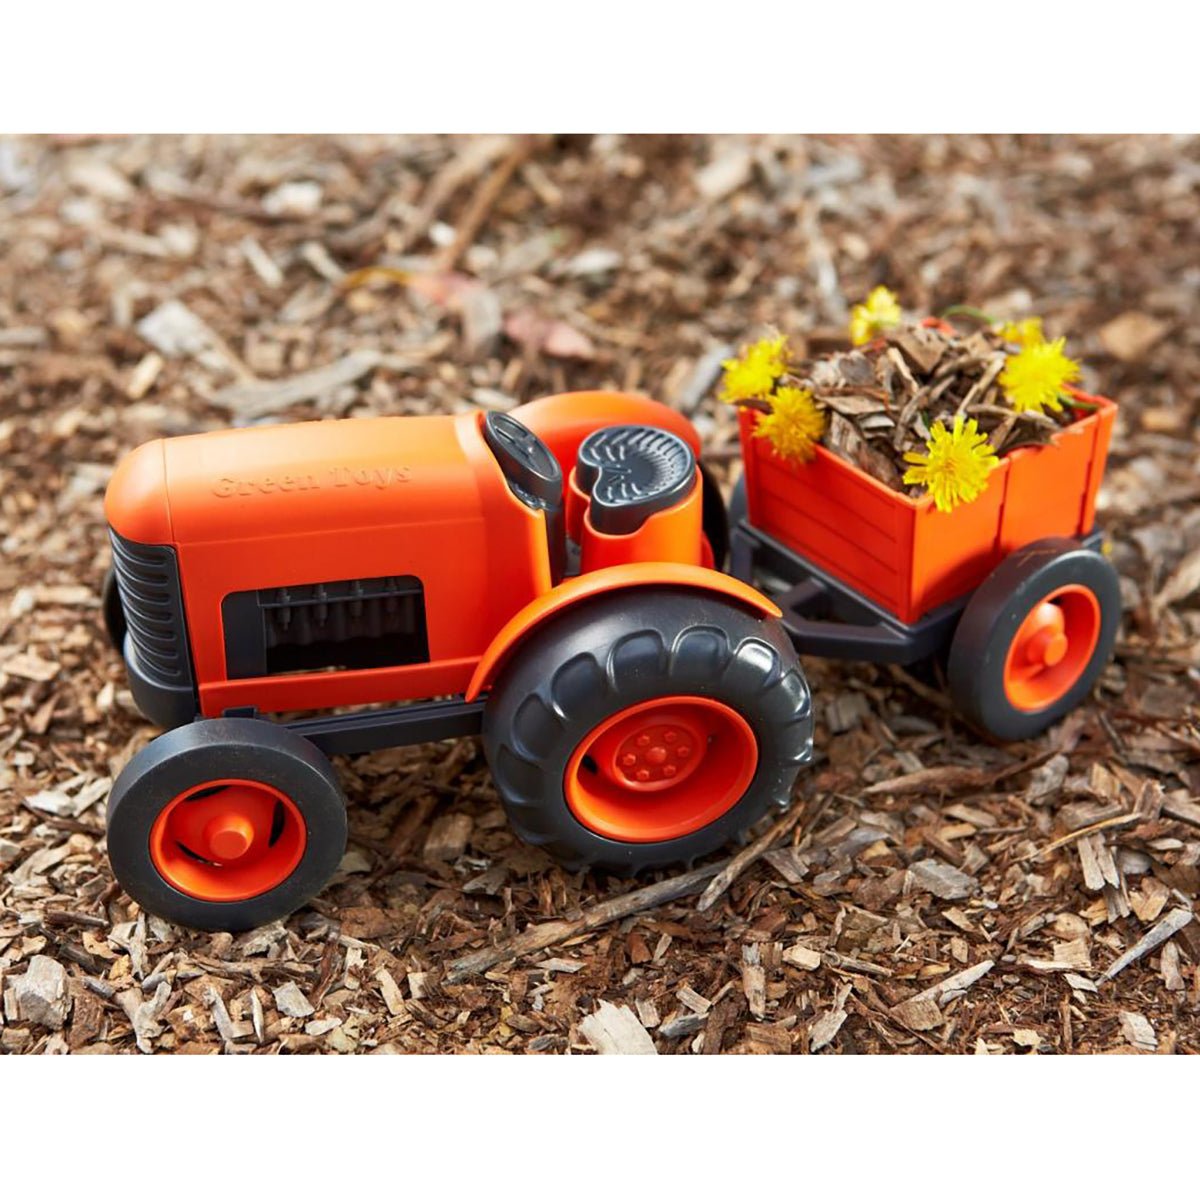 Green Toys Tractor | Green Toys